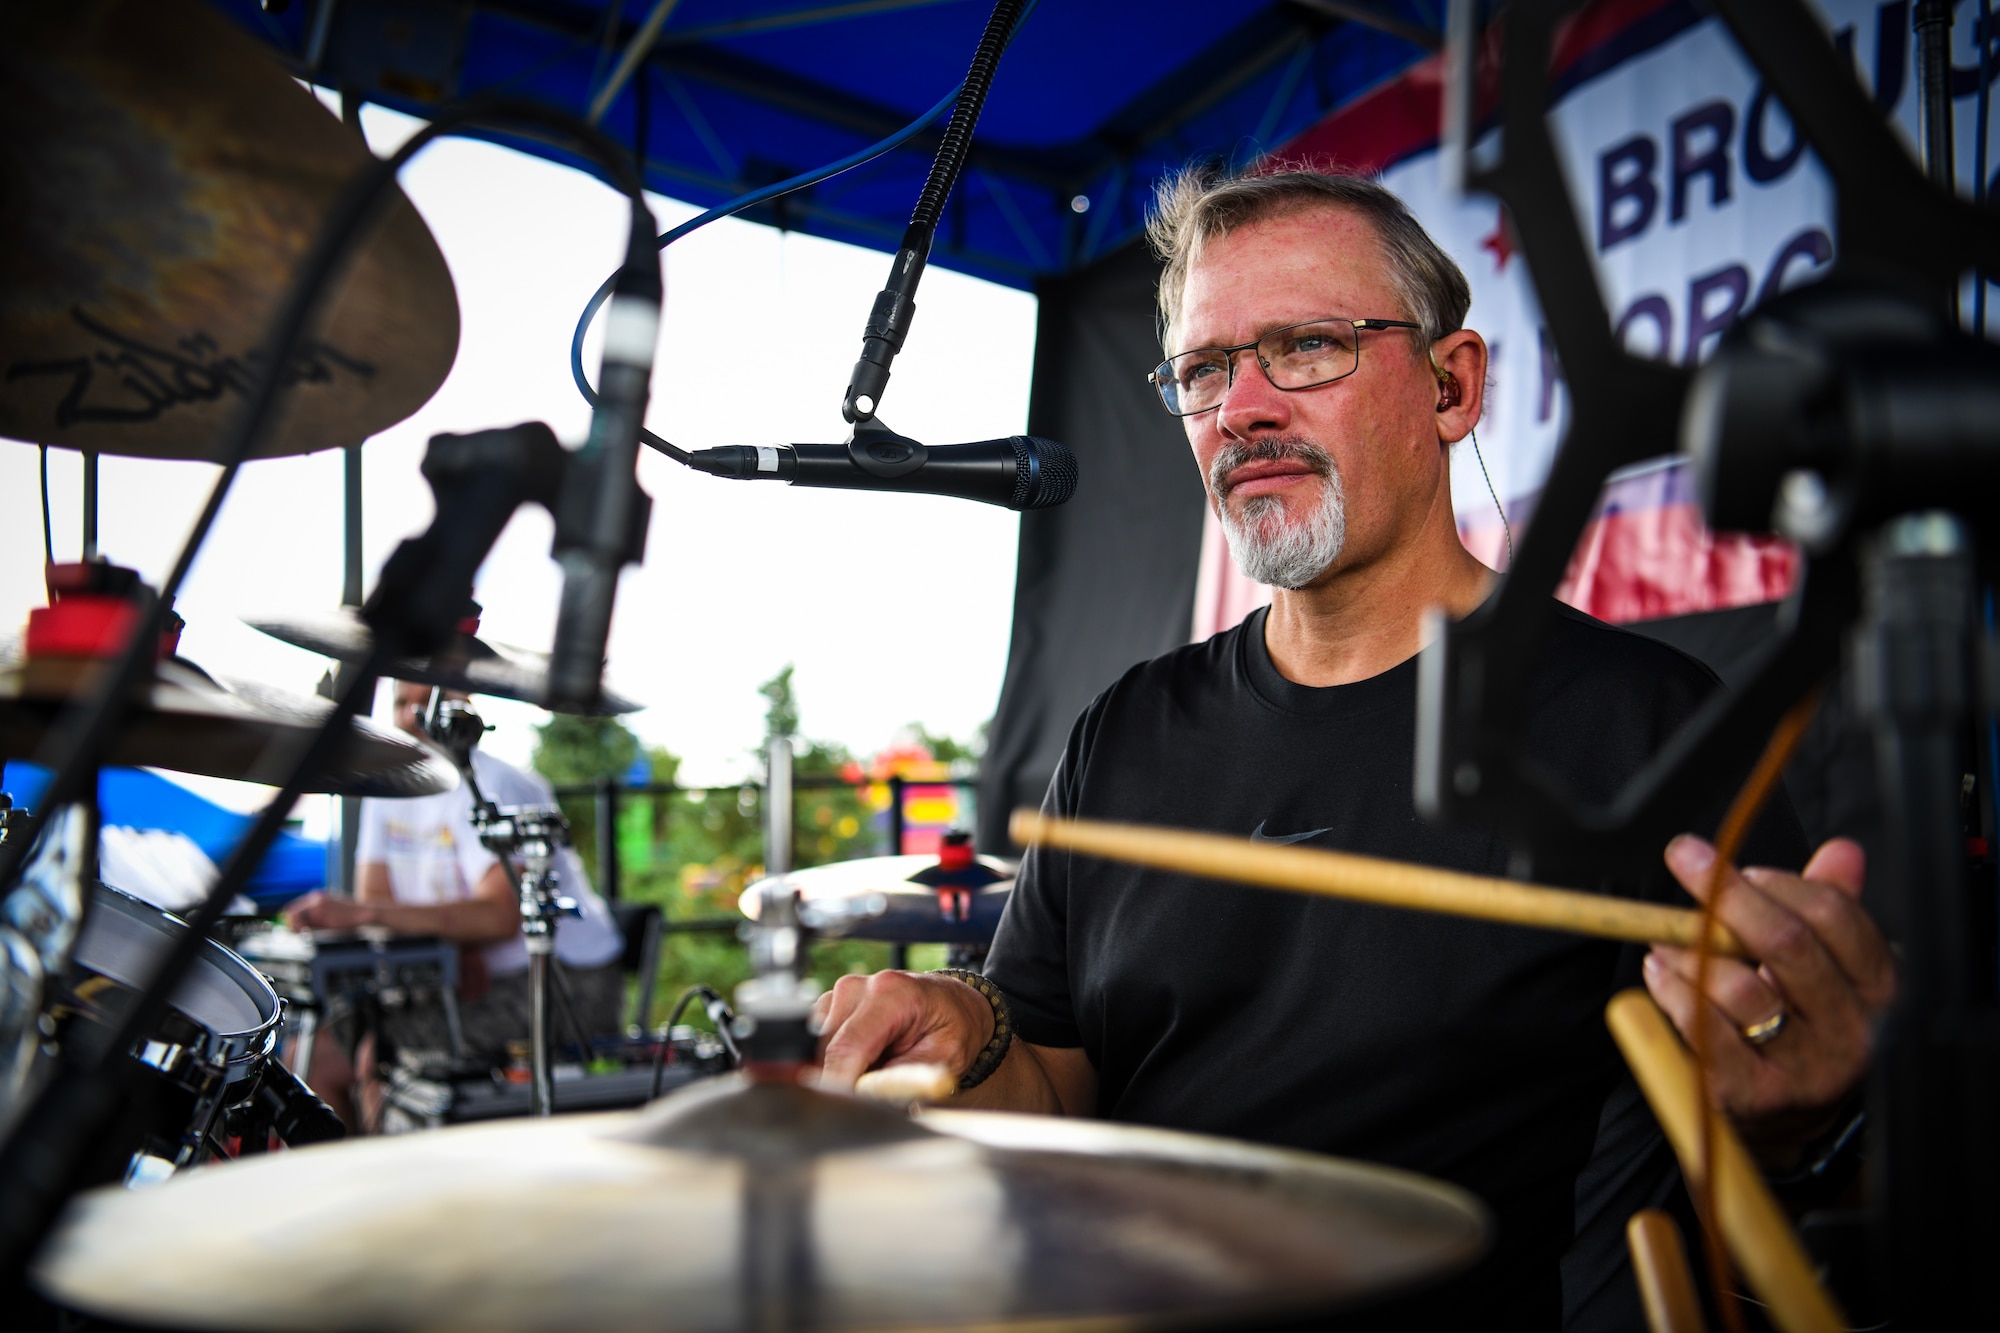 A drummer for a Ryan Daniel band practices the snare and keeping tempo before performing at Fun Fest, July 25, 2019 on Buckley Air Force Base, Colo. Various agencies and partners sponsored Fun Fest, providing service members and families with free food, music, and over 50 different activities and games to enjoy. (U.S. Air Force photo by Airman 1st Class Michael D. Mathews)